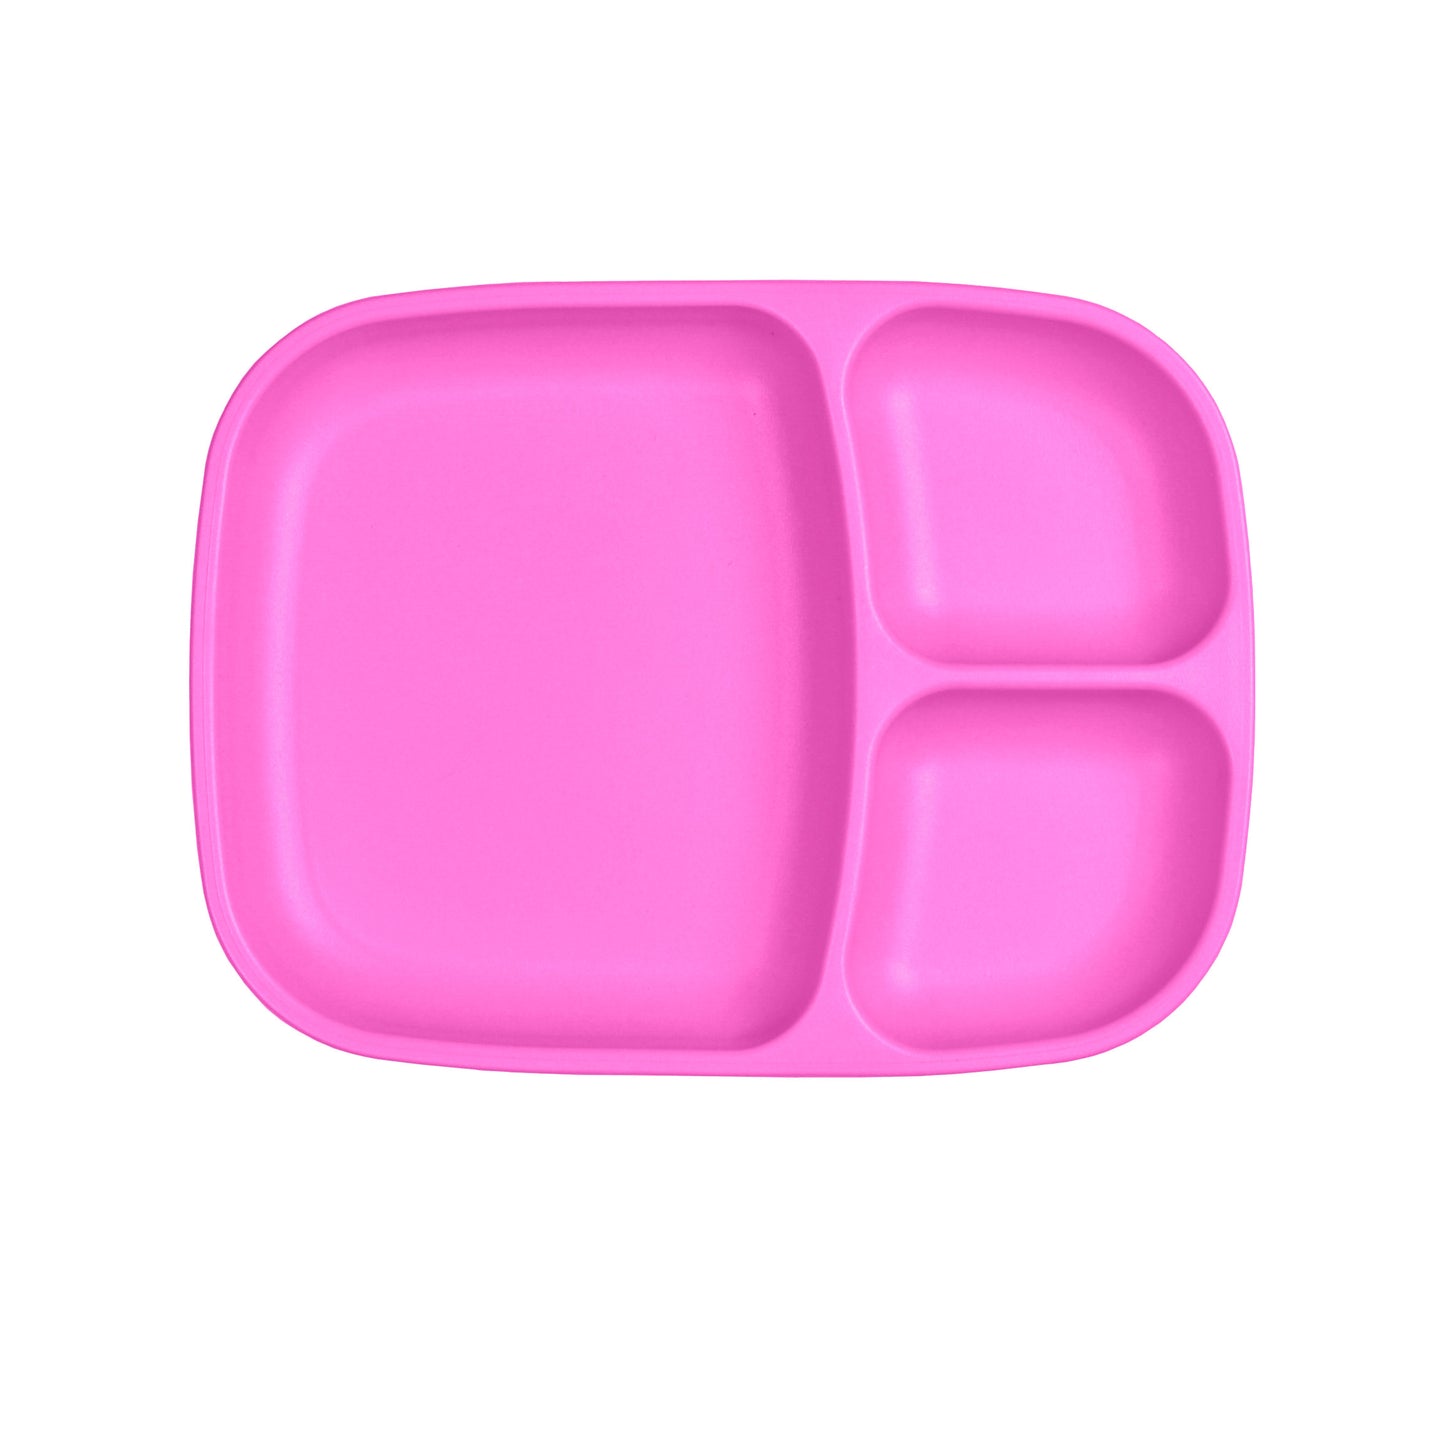 Re-Play Large Divided Plate - Vivid Pink